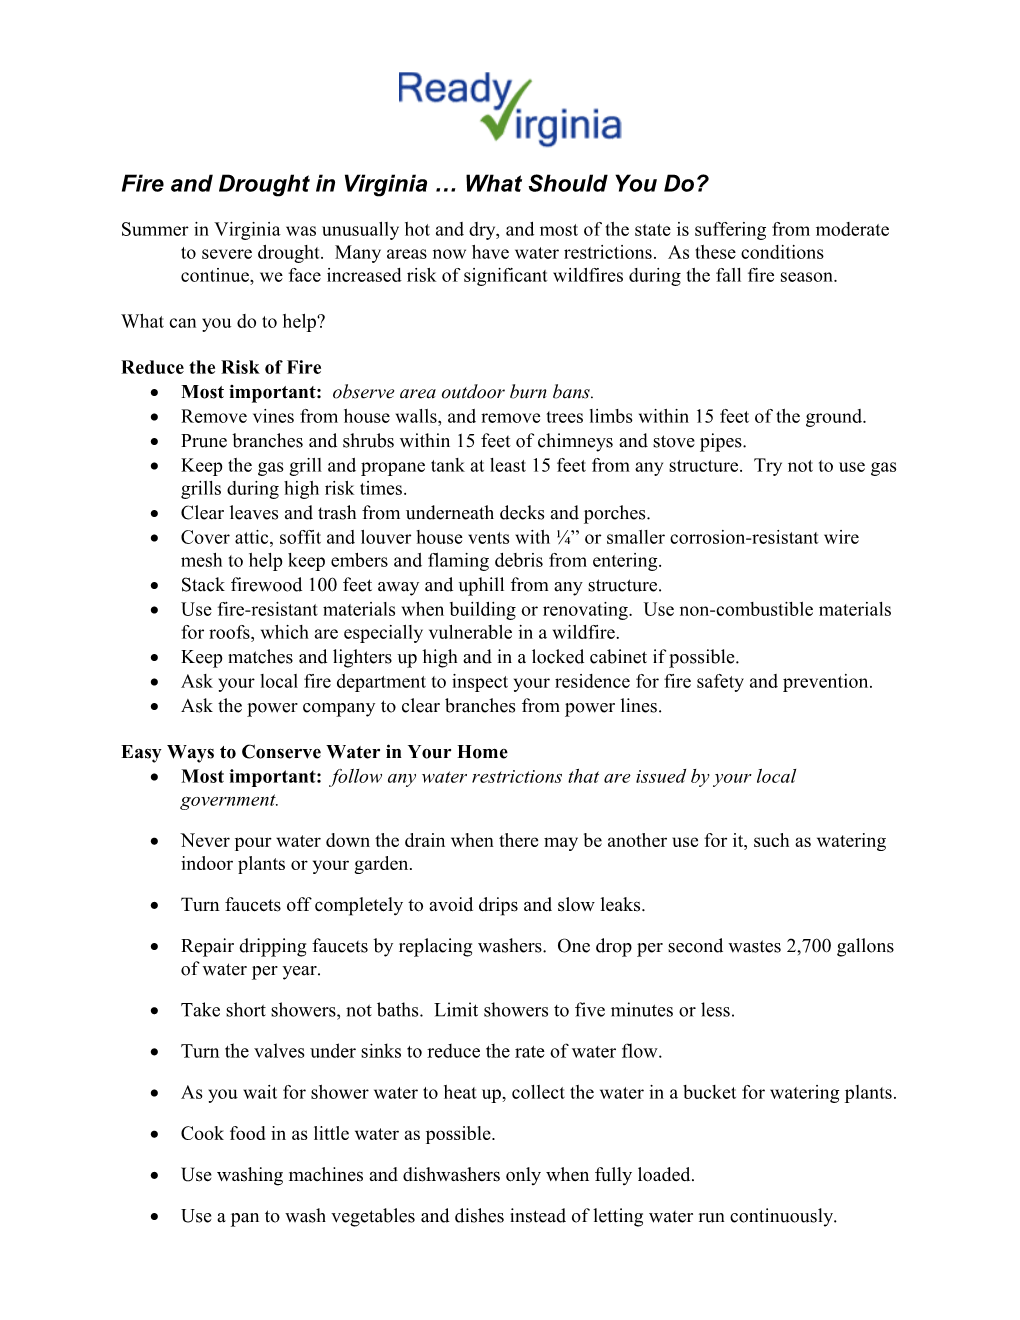 Fire and Drought in Virginia What Should You Do?